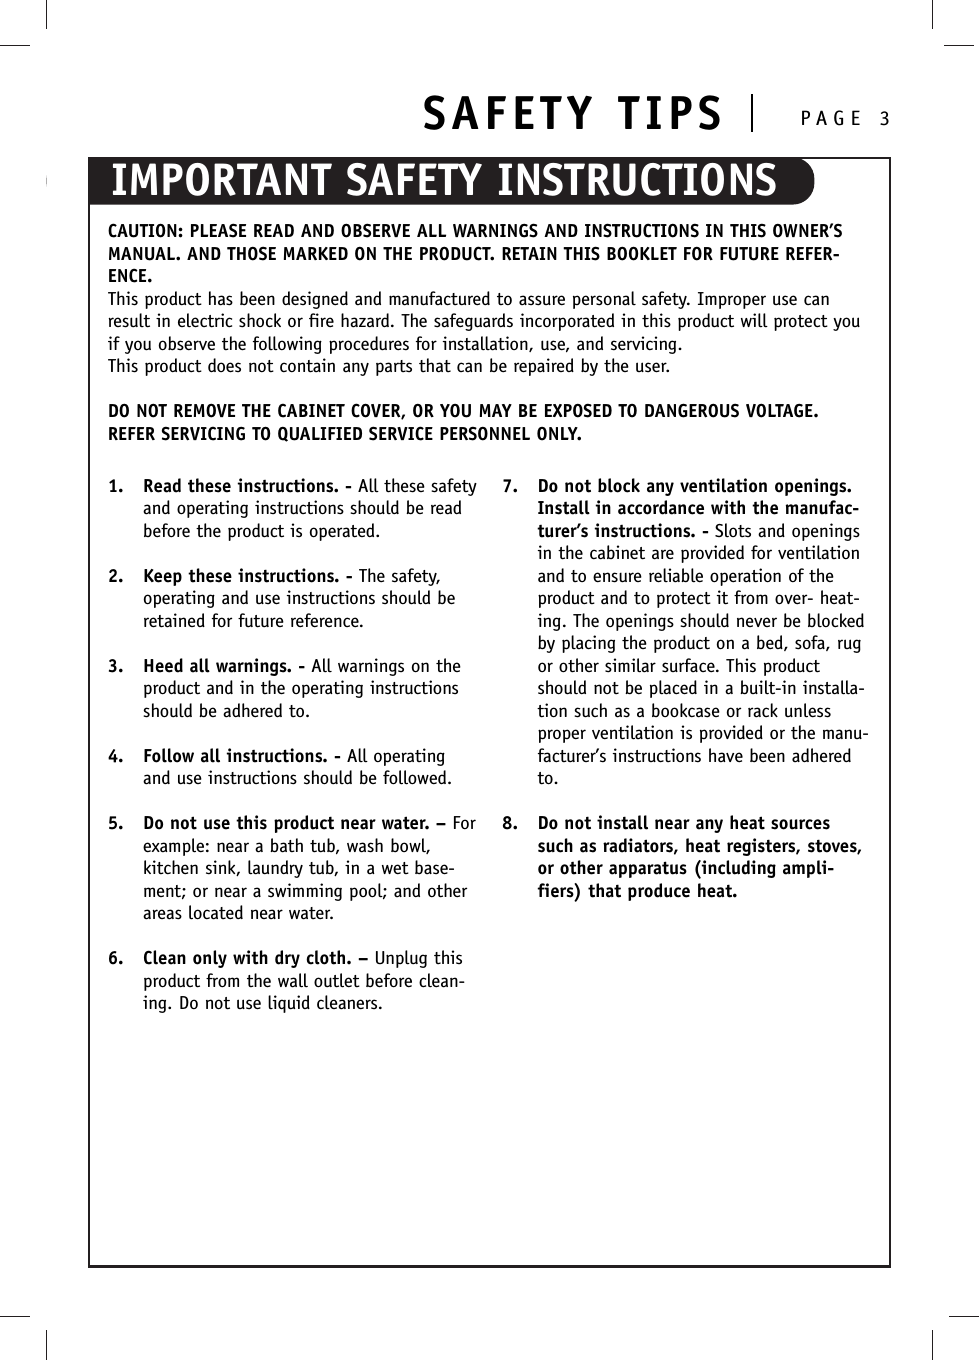 IMPORTANT SAFETY INSTRUCTIONSSAFETY TIPS PAGE 3CAUTION: PLEASE READ AND OBSERVE ALL WARNINGS AND INSTRUCTIONS IN THIS OWNER’SMANUAL. AND THOSE MARKED ON THE PRODUCT. RETAIN THIS BOOKLET FOR FUTURE REFER-ENCE.This product has been designed and manufactured to assure personal safety. Improper use canresult in electric shock or fire hazard. The safeguards incorporated in this product will protect youif you observe the following procedures for installation, use, and servicing.This product does not contain any parts that can be repaired by the user.DO NOT REMOVE THE CABINET COVER, OR YOU MAY BE EXPOSED TO DANGEROUS VOLTAGE.REFER SERVICING TO QUALIFIED SERVICE PERSONNEL ONLY.1. Read these instructions. - All these safetyand operating instructions should be readbefore the product is operated.2. Keep these instructions. - The safety,operating and use instructions should beretained for future reference.3. Heed all warnings. - All warnings on theproduct and in the operating instructionsshould be adhered to.4. Follow all instructions. - All operatingand use instructions should be followed.5. Do not use this product near water. – Forexample: near a bath tub, wash bowl,kitchen sink, laundry tub, in a wet base-ment; or near a swimming pool; and otherareas located near water.6. Clean only with dry cloth. – Unplug thisproduct from the wall outlet before clean-ing. Do not use liquid cleaners.7. Do not block any ventilation openings.Install in accordance with the manufac-turer’s instructions. - Slots and openingsin the cabinet are provided for ventilationand to ensure reliable operation of theproduct and to protect it from over- heat-ing. The openings should never be blockedby placing the product on a bed, sofa, rugor other similar surface. This productshould not be placed in a built-in installa-tion such as a bookcase or rack unlessproper ventilation is provided or the manu-facturer’s instructions have been adheredto.8. Do not install near any heat sourcessuch as radiators, heat registers, stoves,or other apparatus (including ampli-fiers) that produce heat.